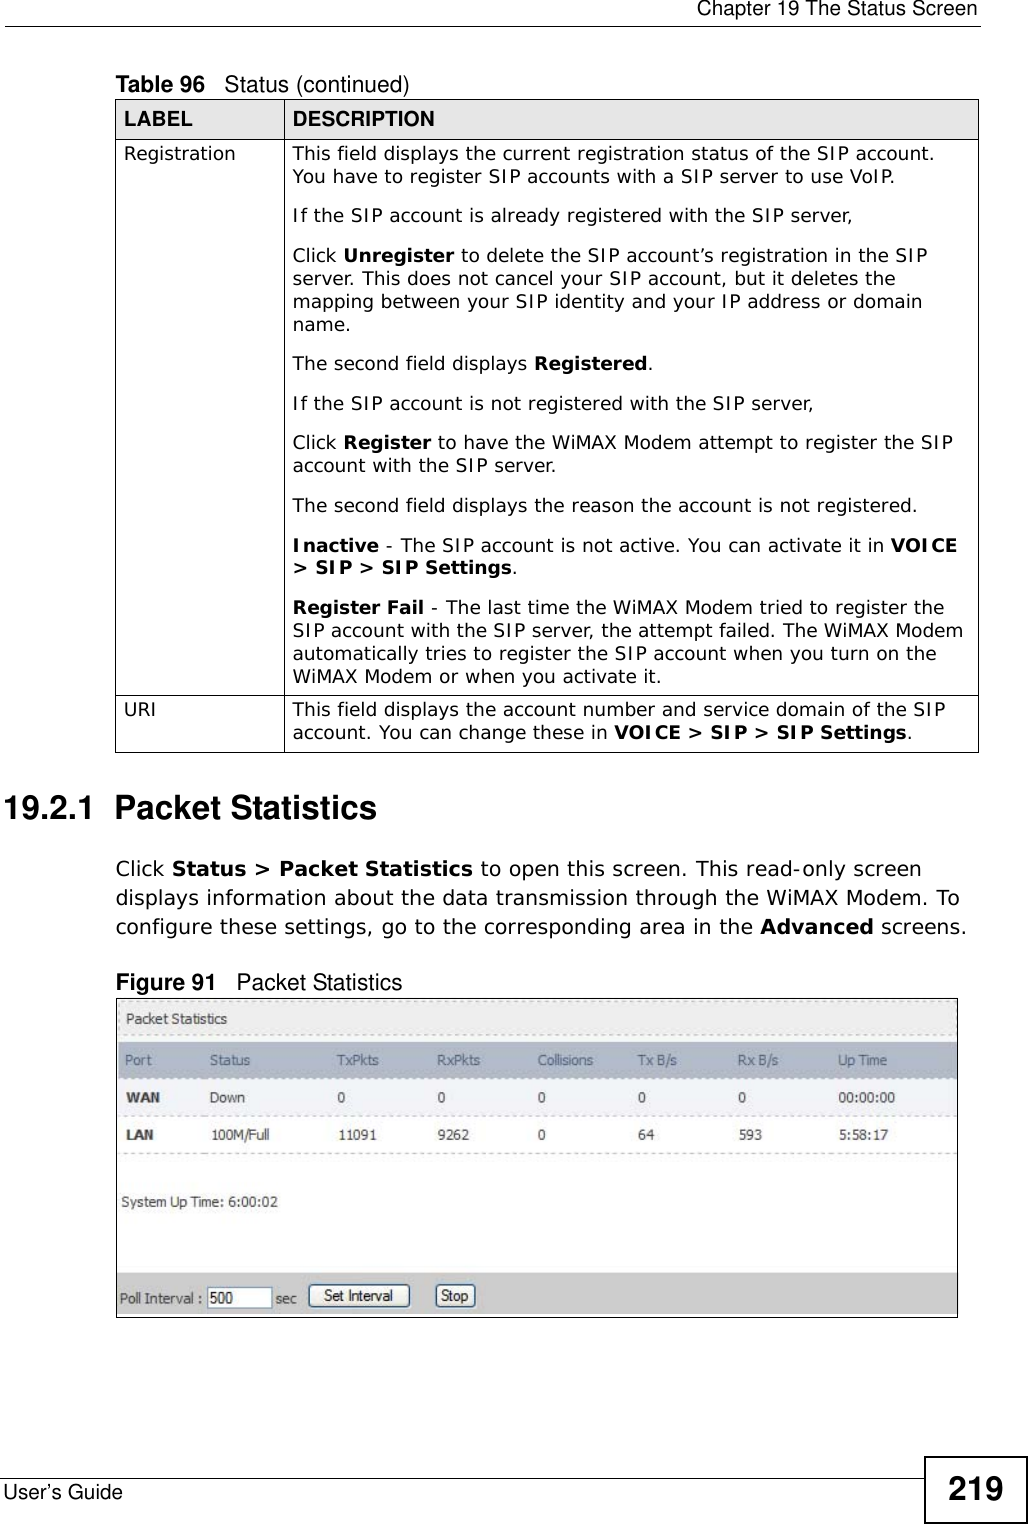  Chapter 19 The Status ScreenUser’s Guide 21919.2.1  Packet StatisticsClick Status &gt; Packet Statistics to open this screen. This read-only screen displays information about the data transmission through the WiMAX Modem. To configure these settings, go to the corresponding area in the Advanced screens.Figure 91   Packet StatisticsRegistration This field displays the current registration status of the SIP account. You have to register SIP accounts with a SIP server to use VoIP.If the SIP account is already registered with the SIP server,Click Unregister to delete the SIP account’s registration in the SIP server. This does not cancel your SIP account, but it deletes the mapping between your SIP identity and your IP address or domain name.The second field displays Registered.If the SIP account is not registered with the SIP server,Click Register to have the WiMAX Modem attempt to register the SIP account with the SIP server.The second field displays the reason the account is not registered.Inactive - The SIP account is not active. You can activate it in VOICE &gt; SIP &gt; SIP Settings.Register Fail - The last time the WiMAX Modem tried to register the SIP account with the SIP server, the attempt failed. The WiMAX Modem automatically tries to register the SIP account when you turn on the WiMAX Modem or when you activate it.URI This field displays the account number and service domain of the SIP account. You can change these in VOICE &gt; SIP &gt; SIP Settings.Table 96   Status (continued)LABEL DESCRIPTION